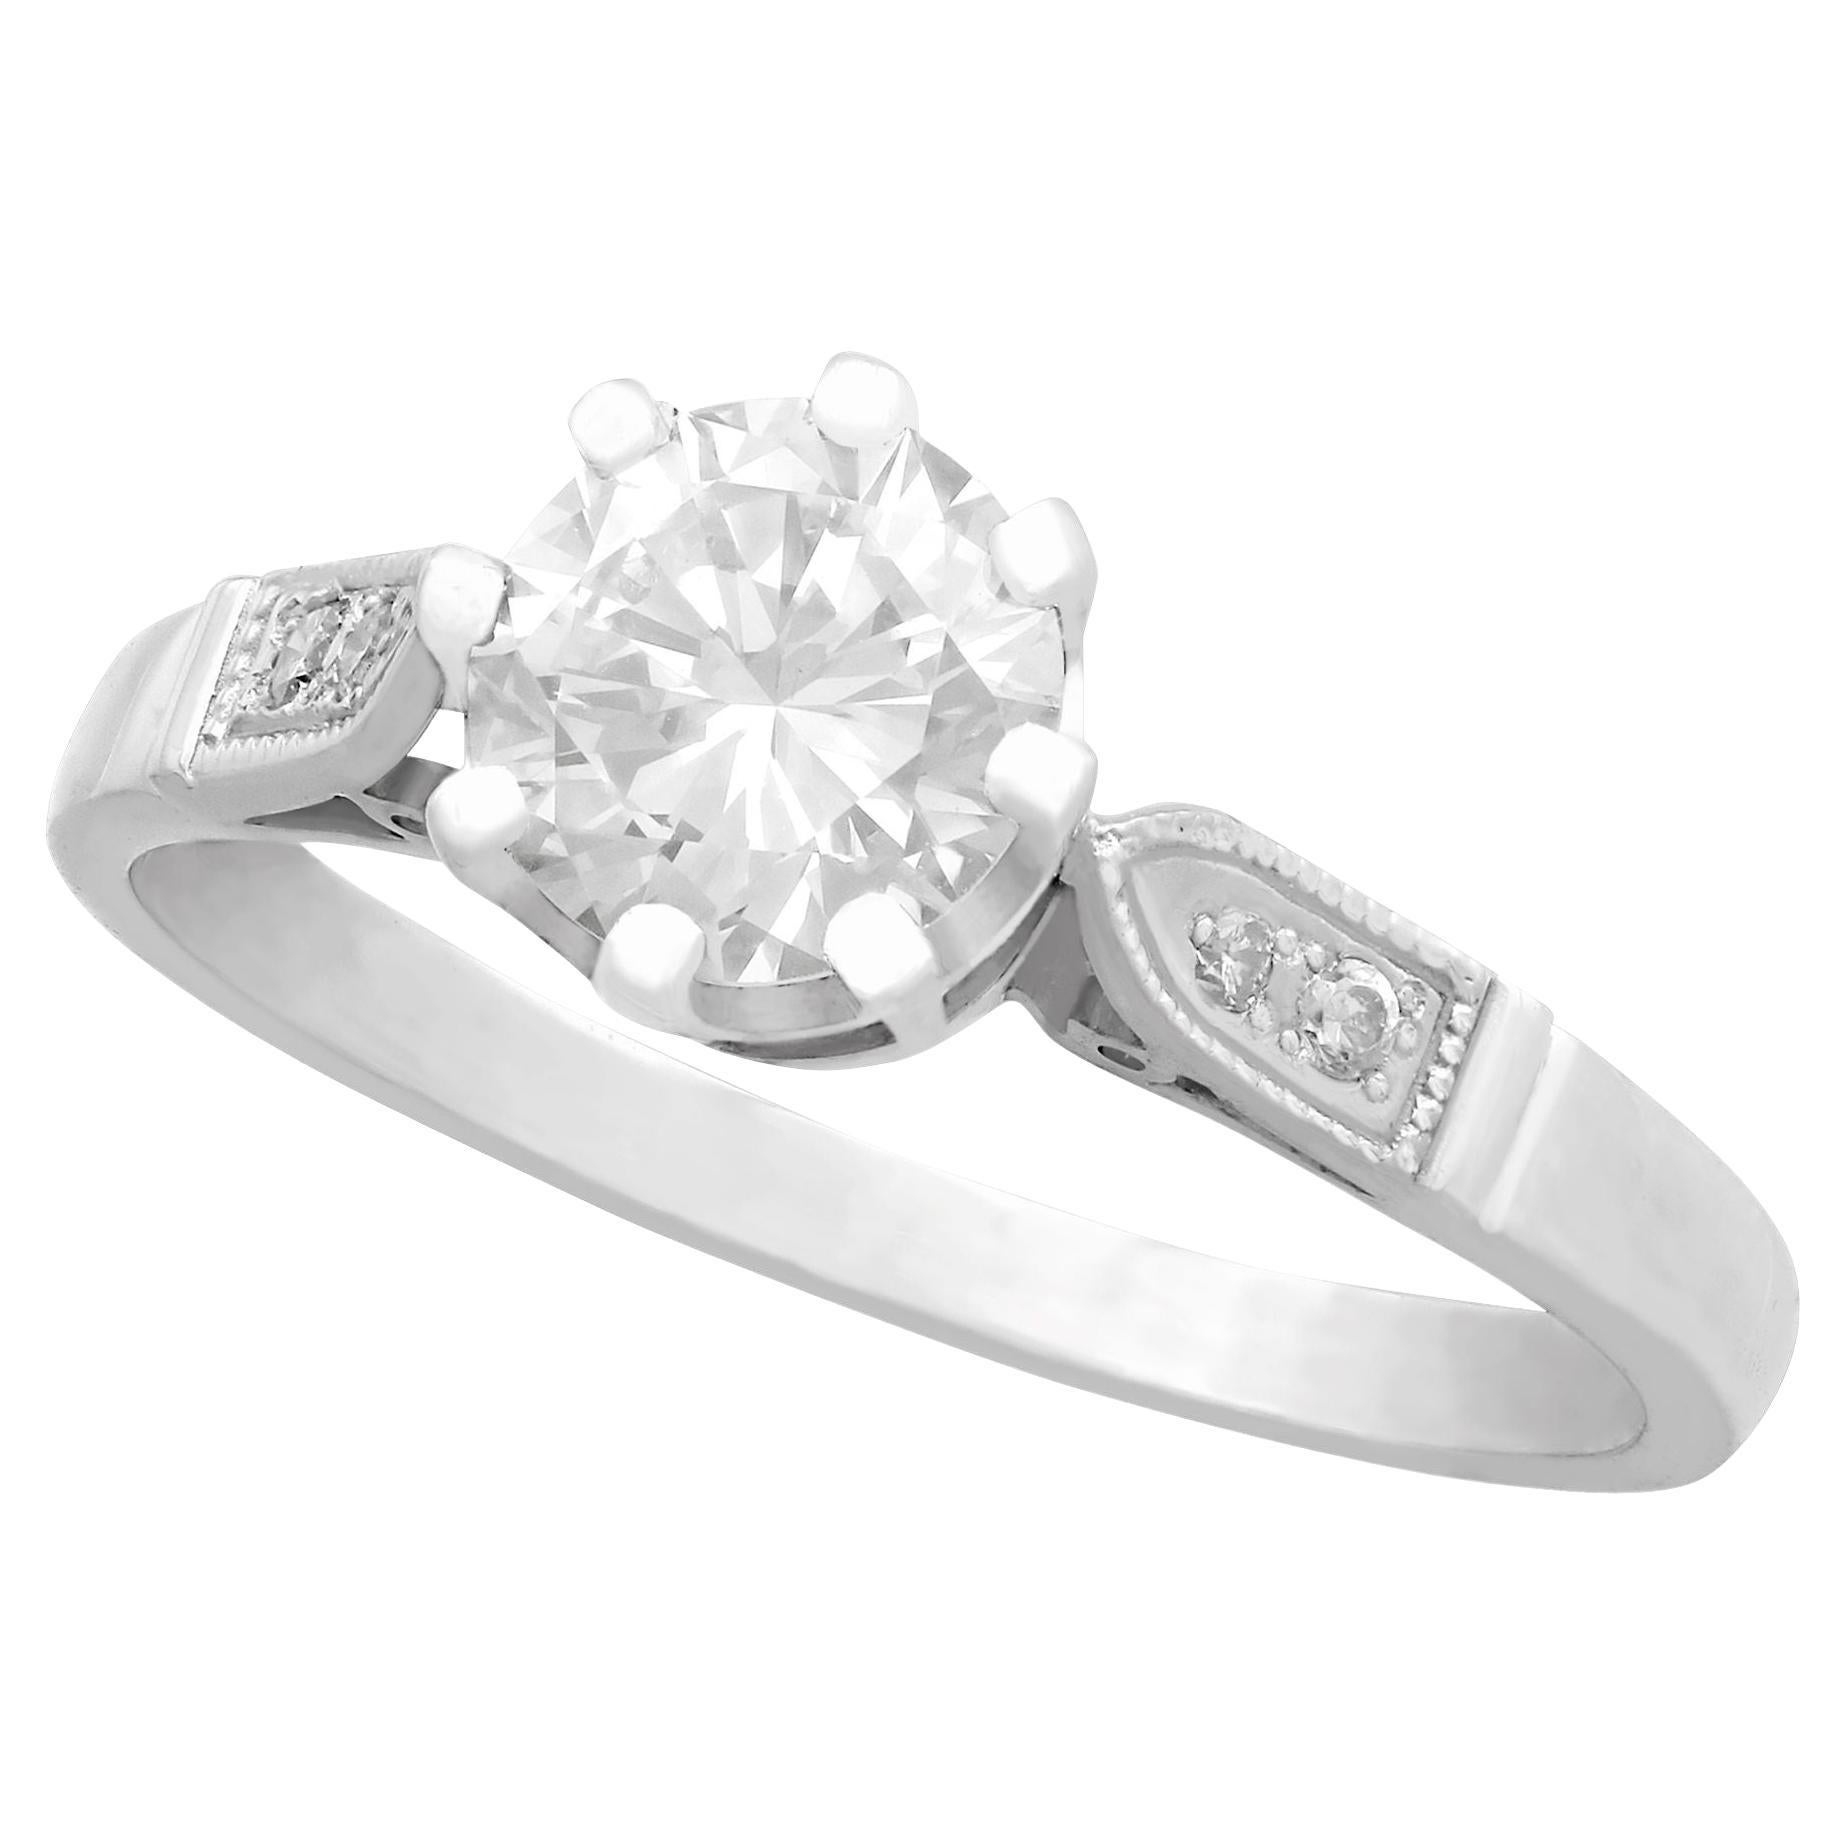 1940s 1.04 Carat Diamond and Platinum Solitaire Engagement Ring For Sale